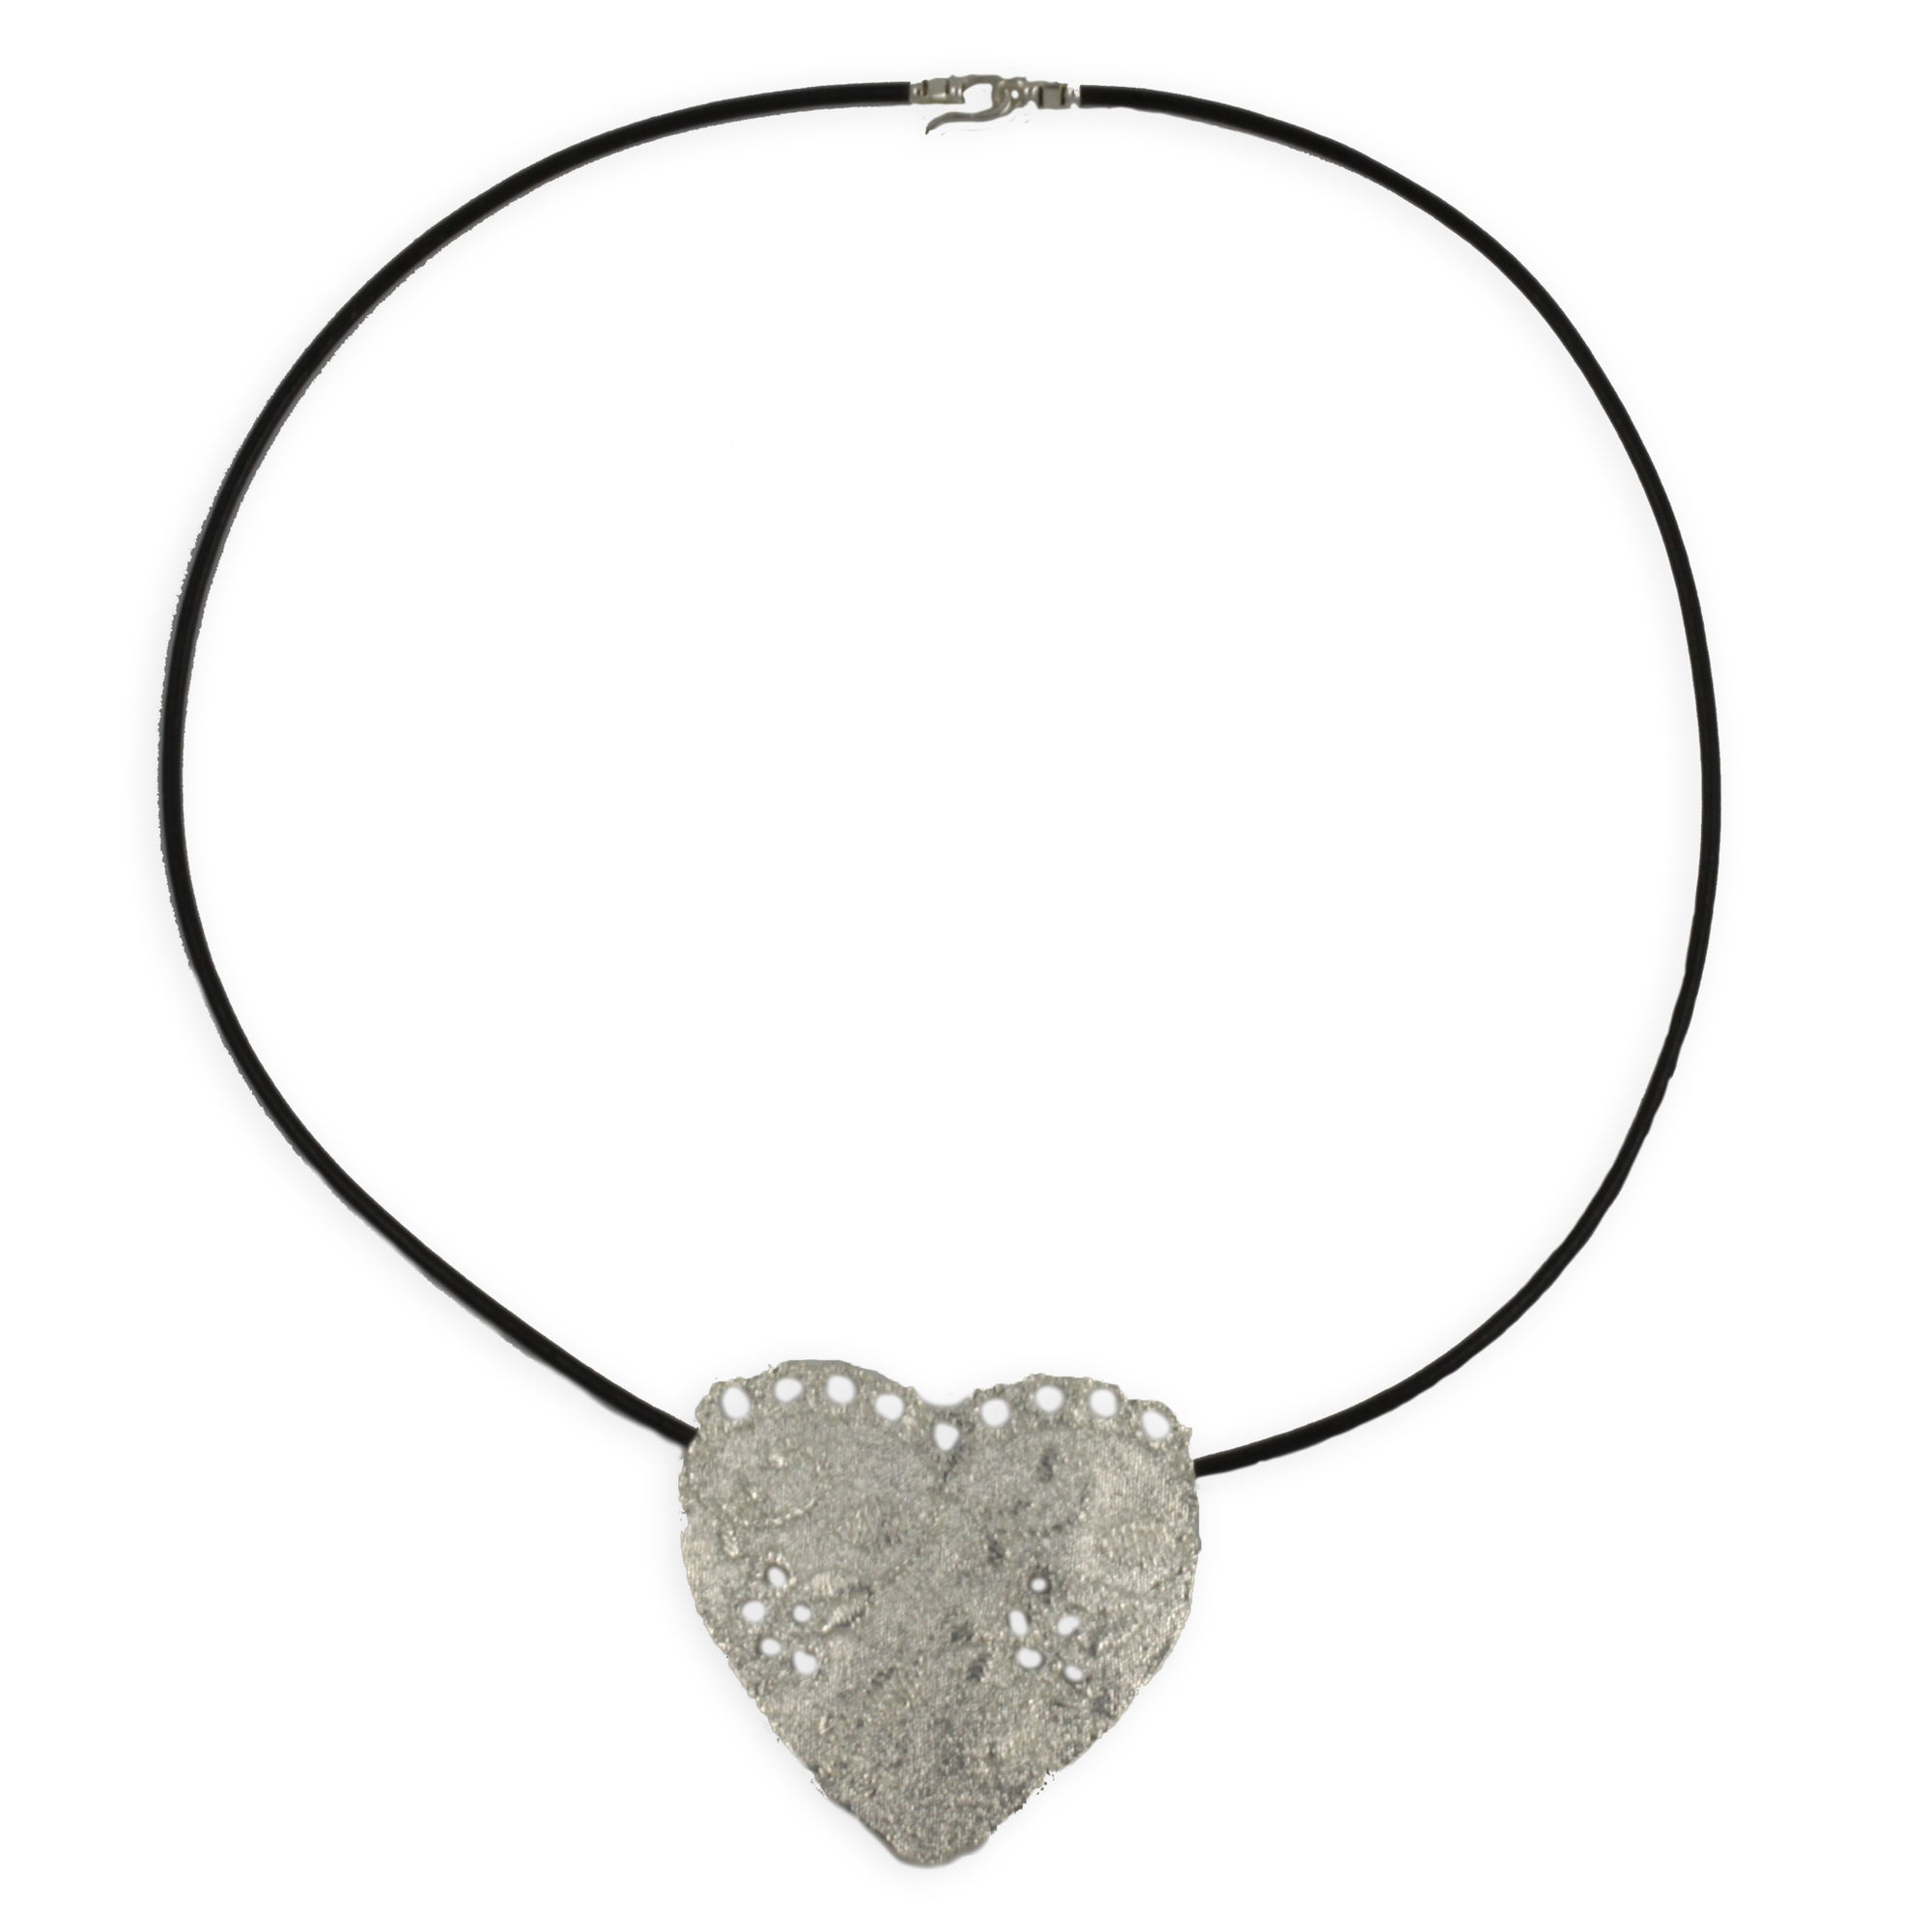 Lace heart necklace in 24k gold with a leather cord.